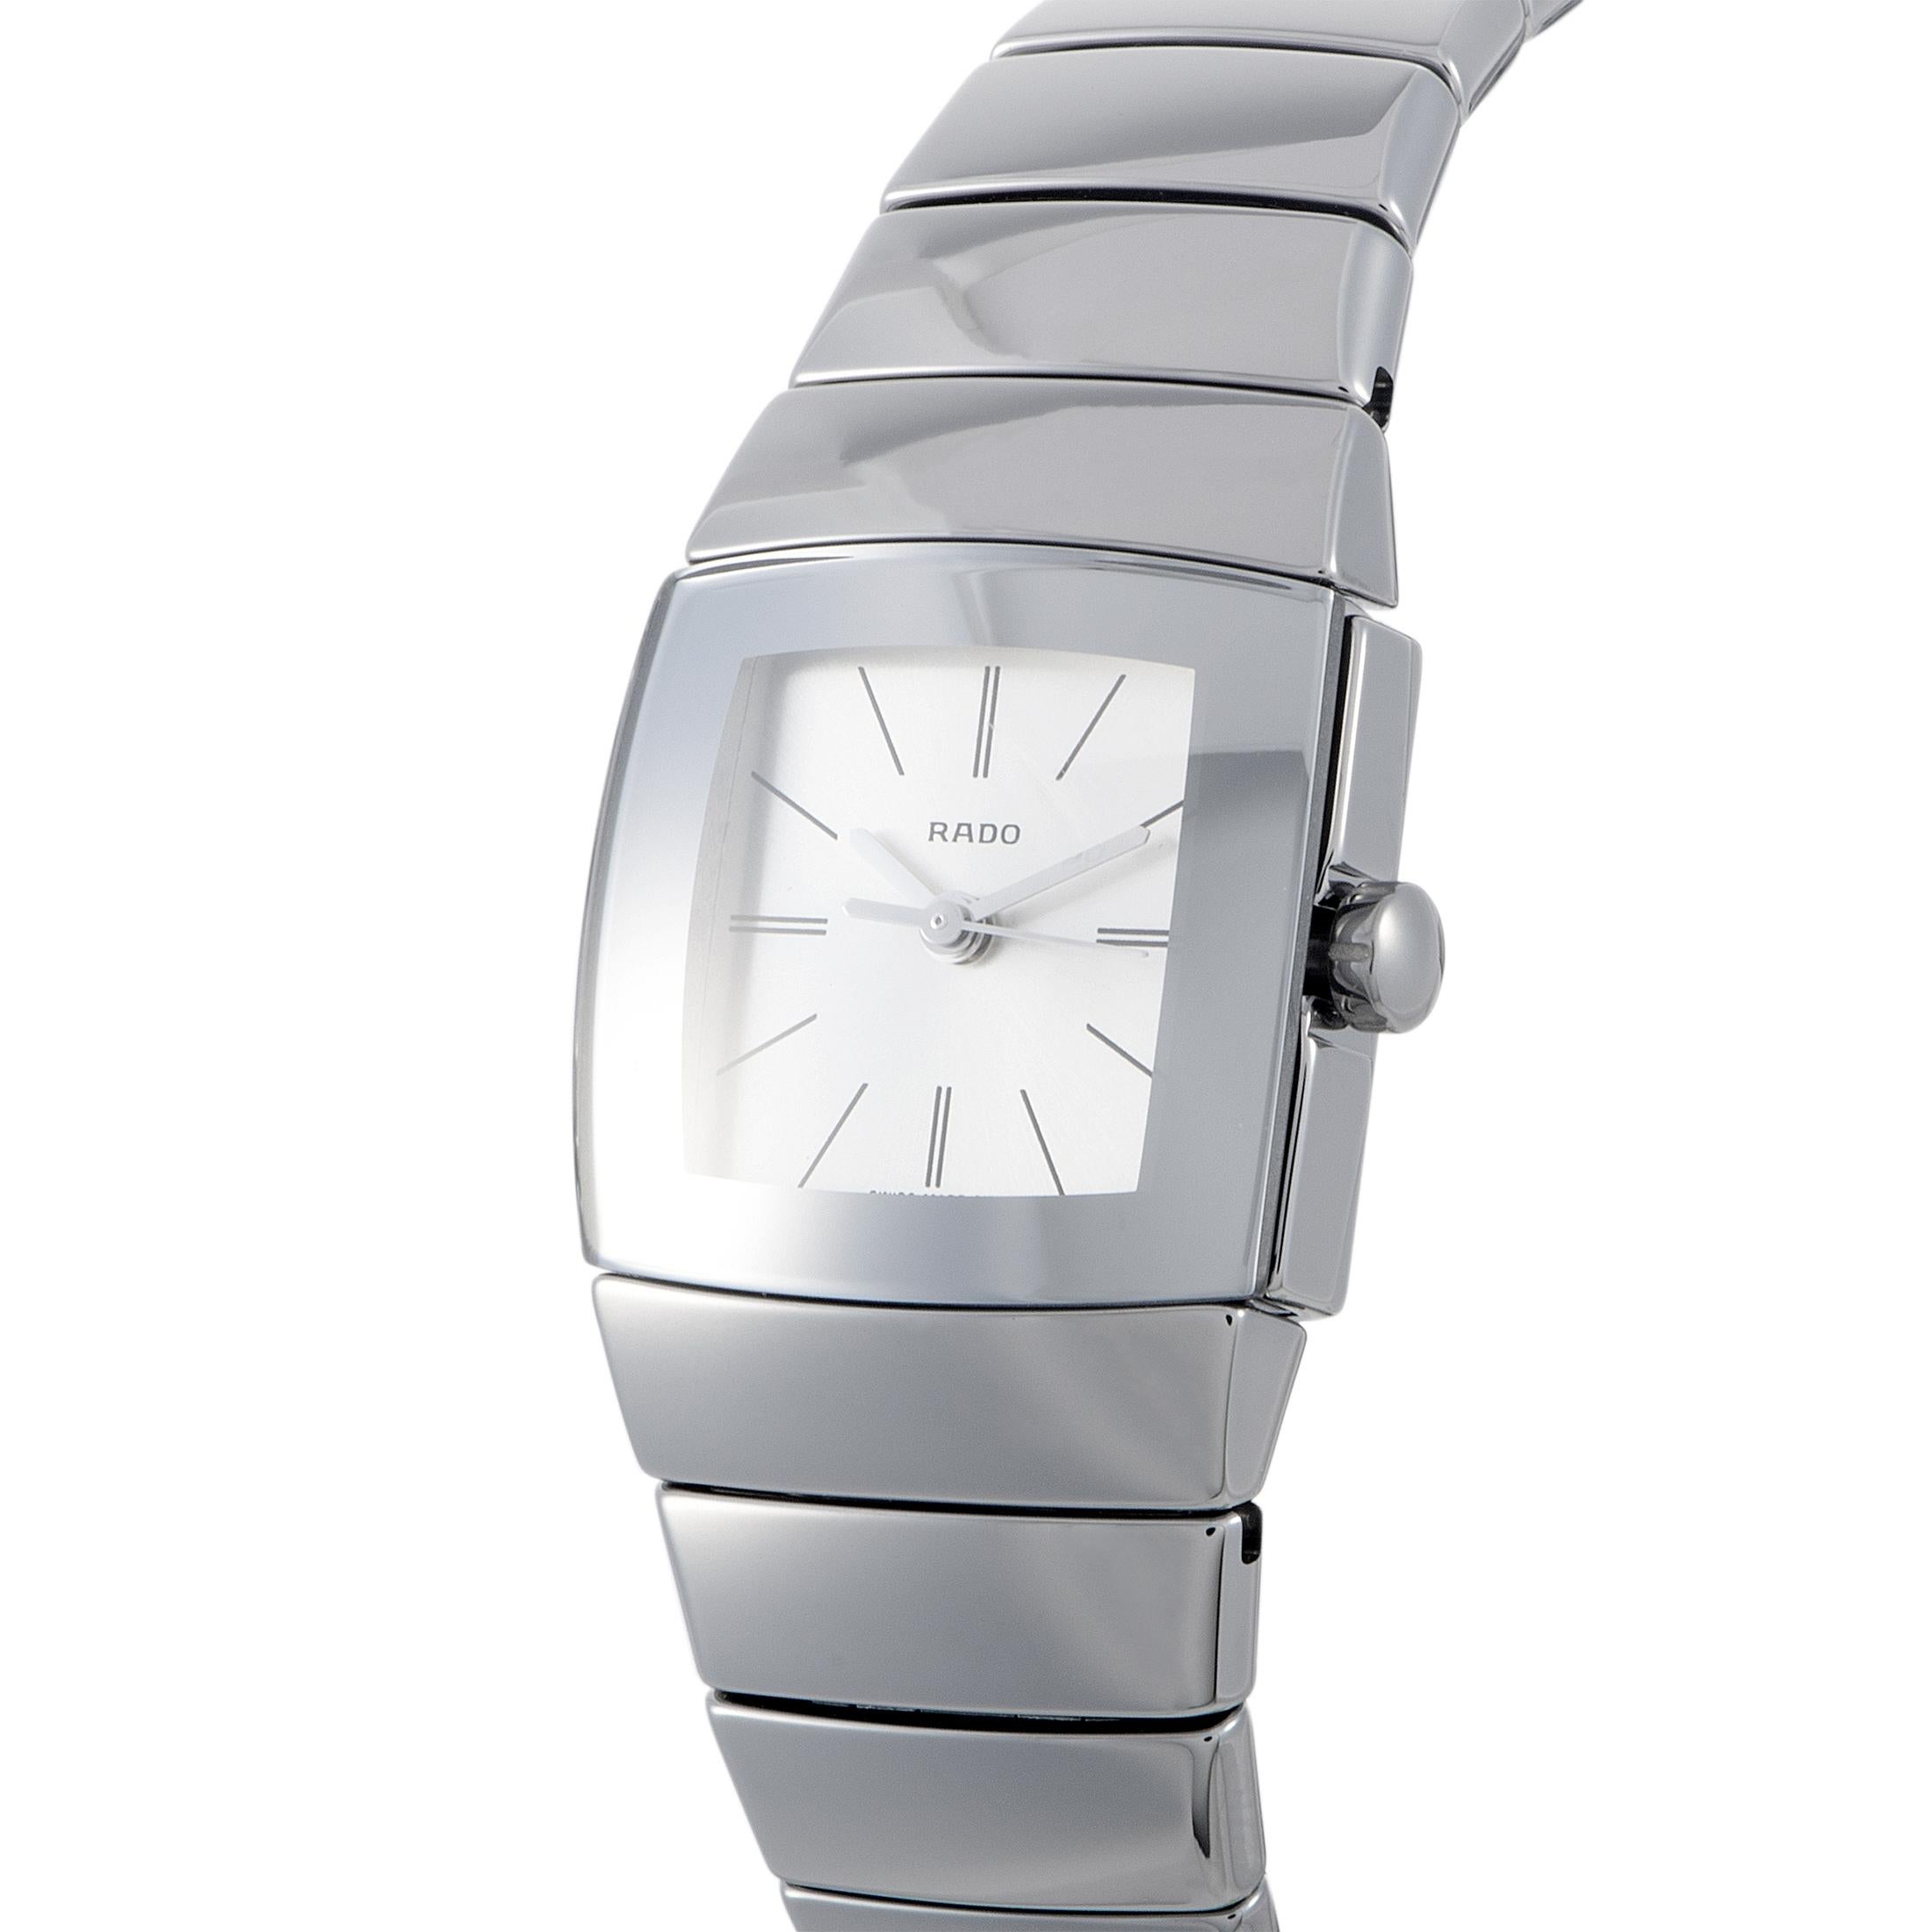 The Rado Montres Sintra watch, reference number R13722122/01.318.0722.3.012, is presented with a high-tech ceramic case that is mounted onto a matching high-tech ceramic bracelet. On the white dial, hours, minutes and seconds are indicated via three